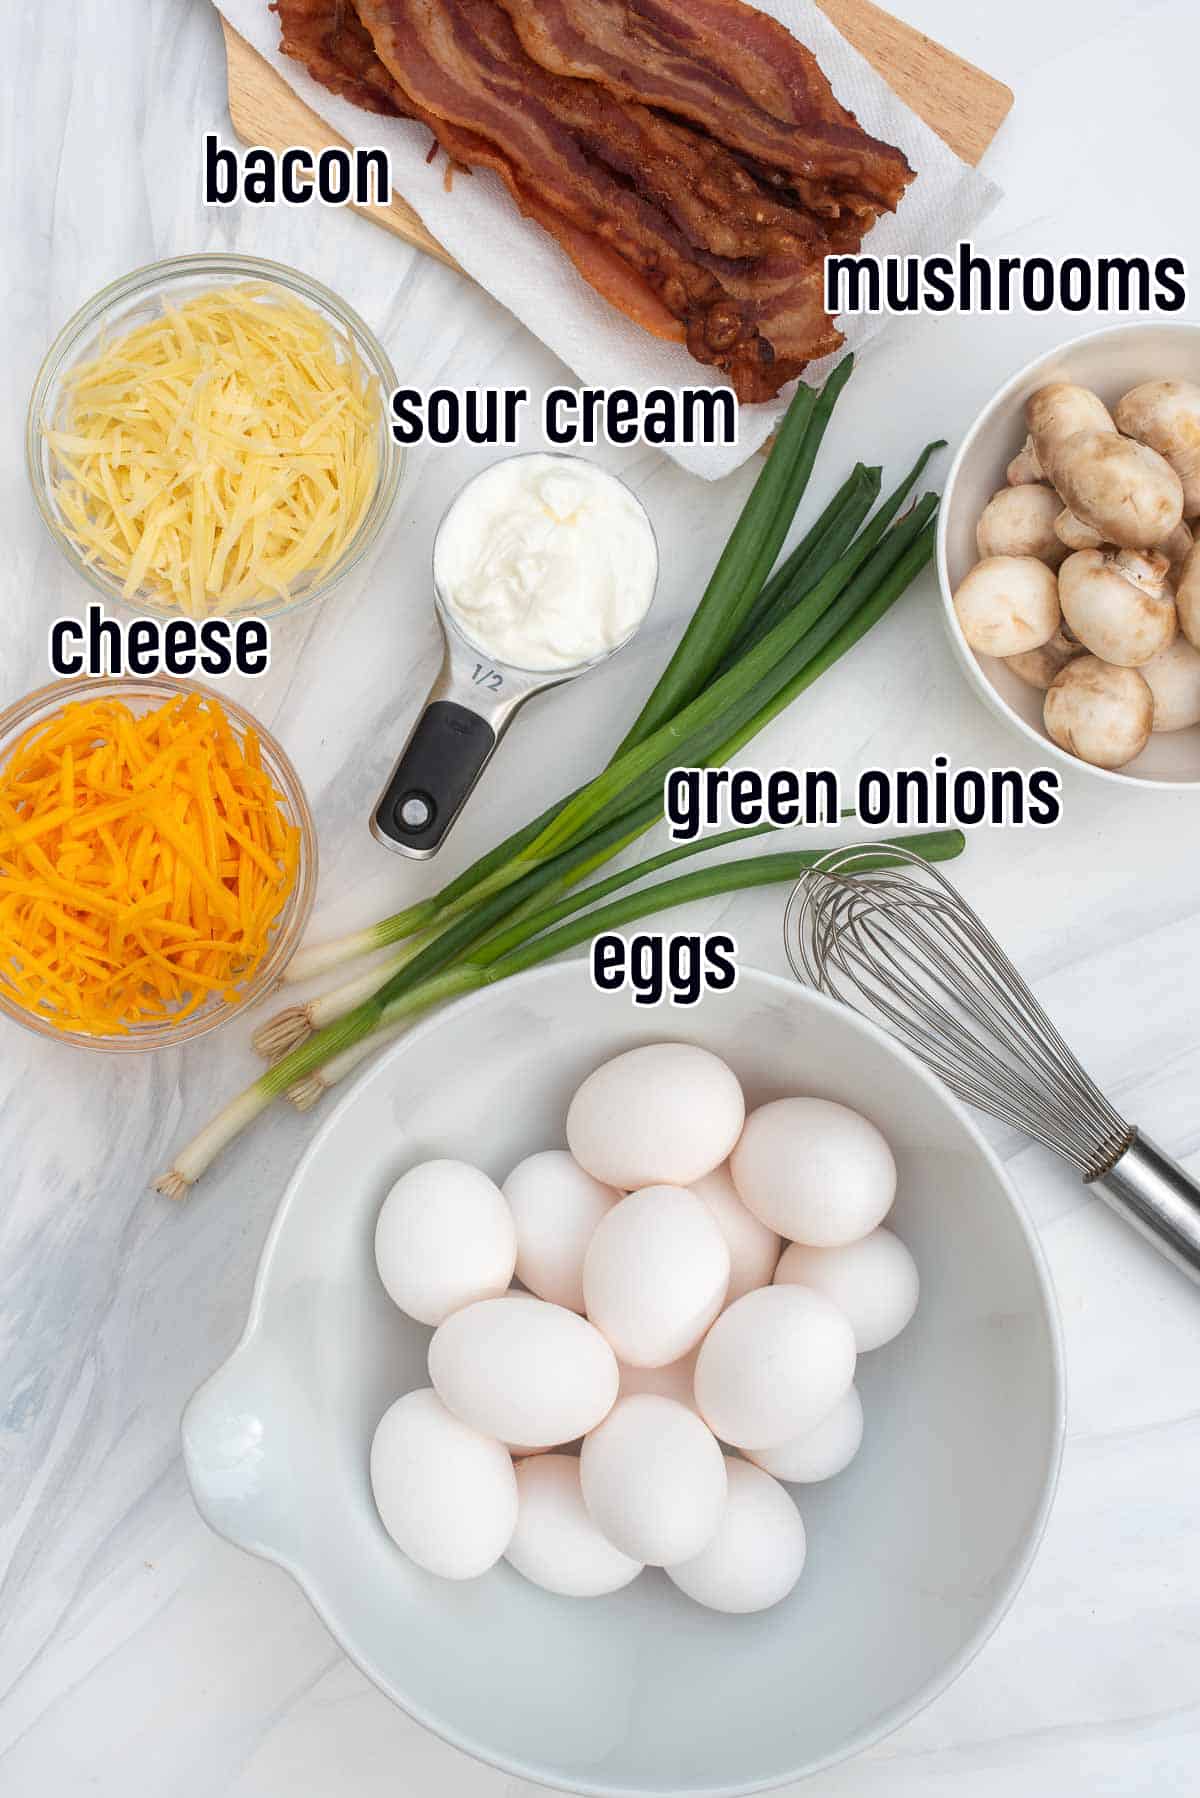 Eggs, cheese, bacon, and other ingredients for crustless quiche bake with text.